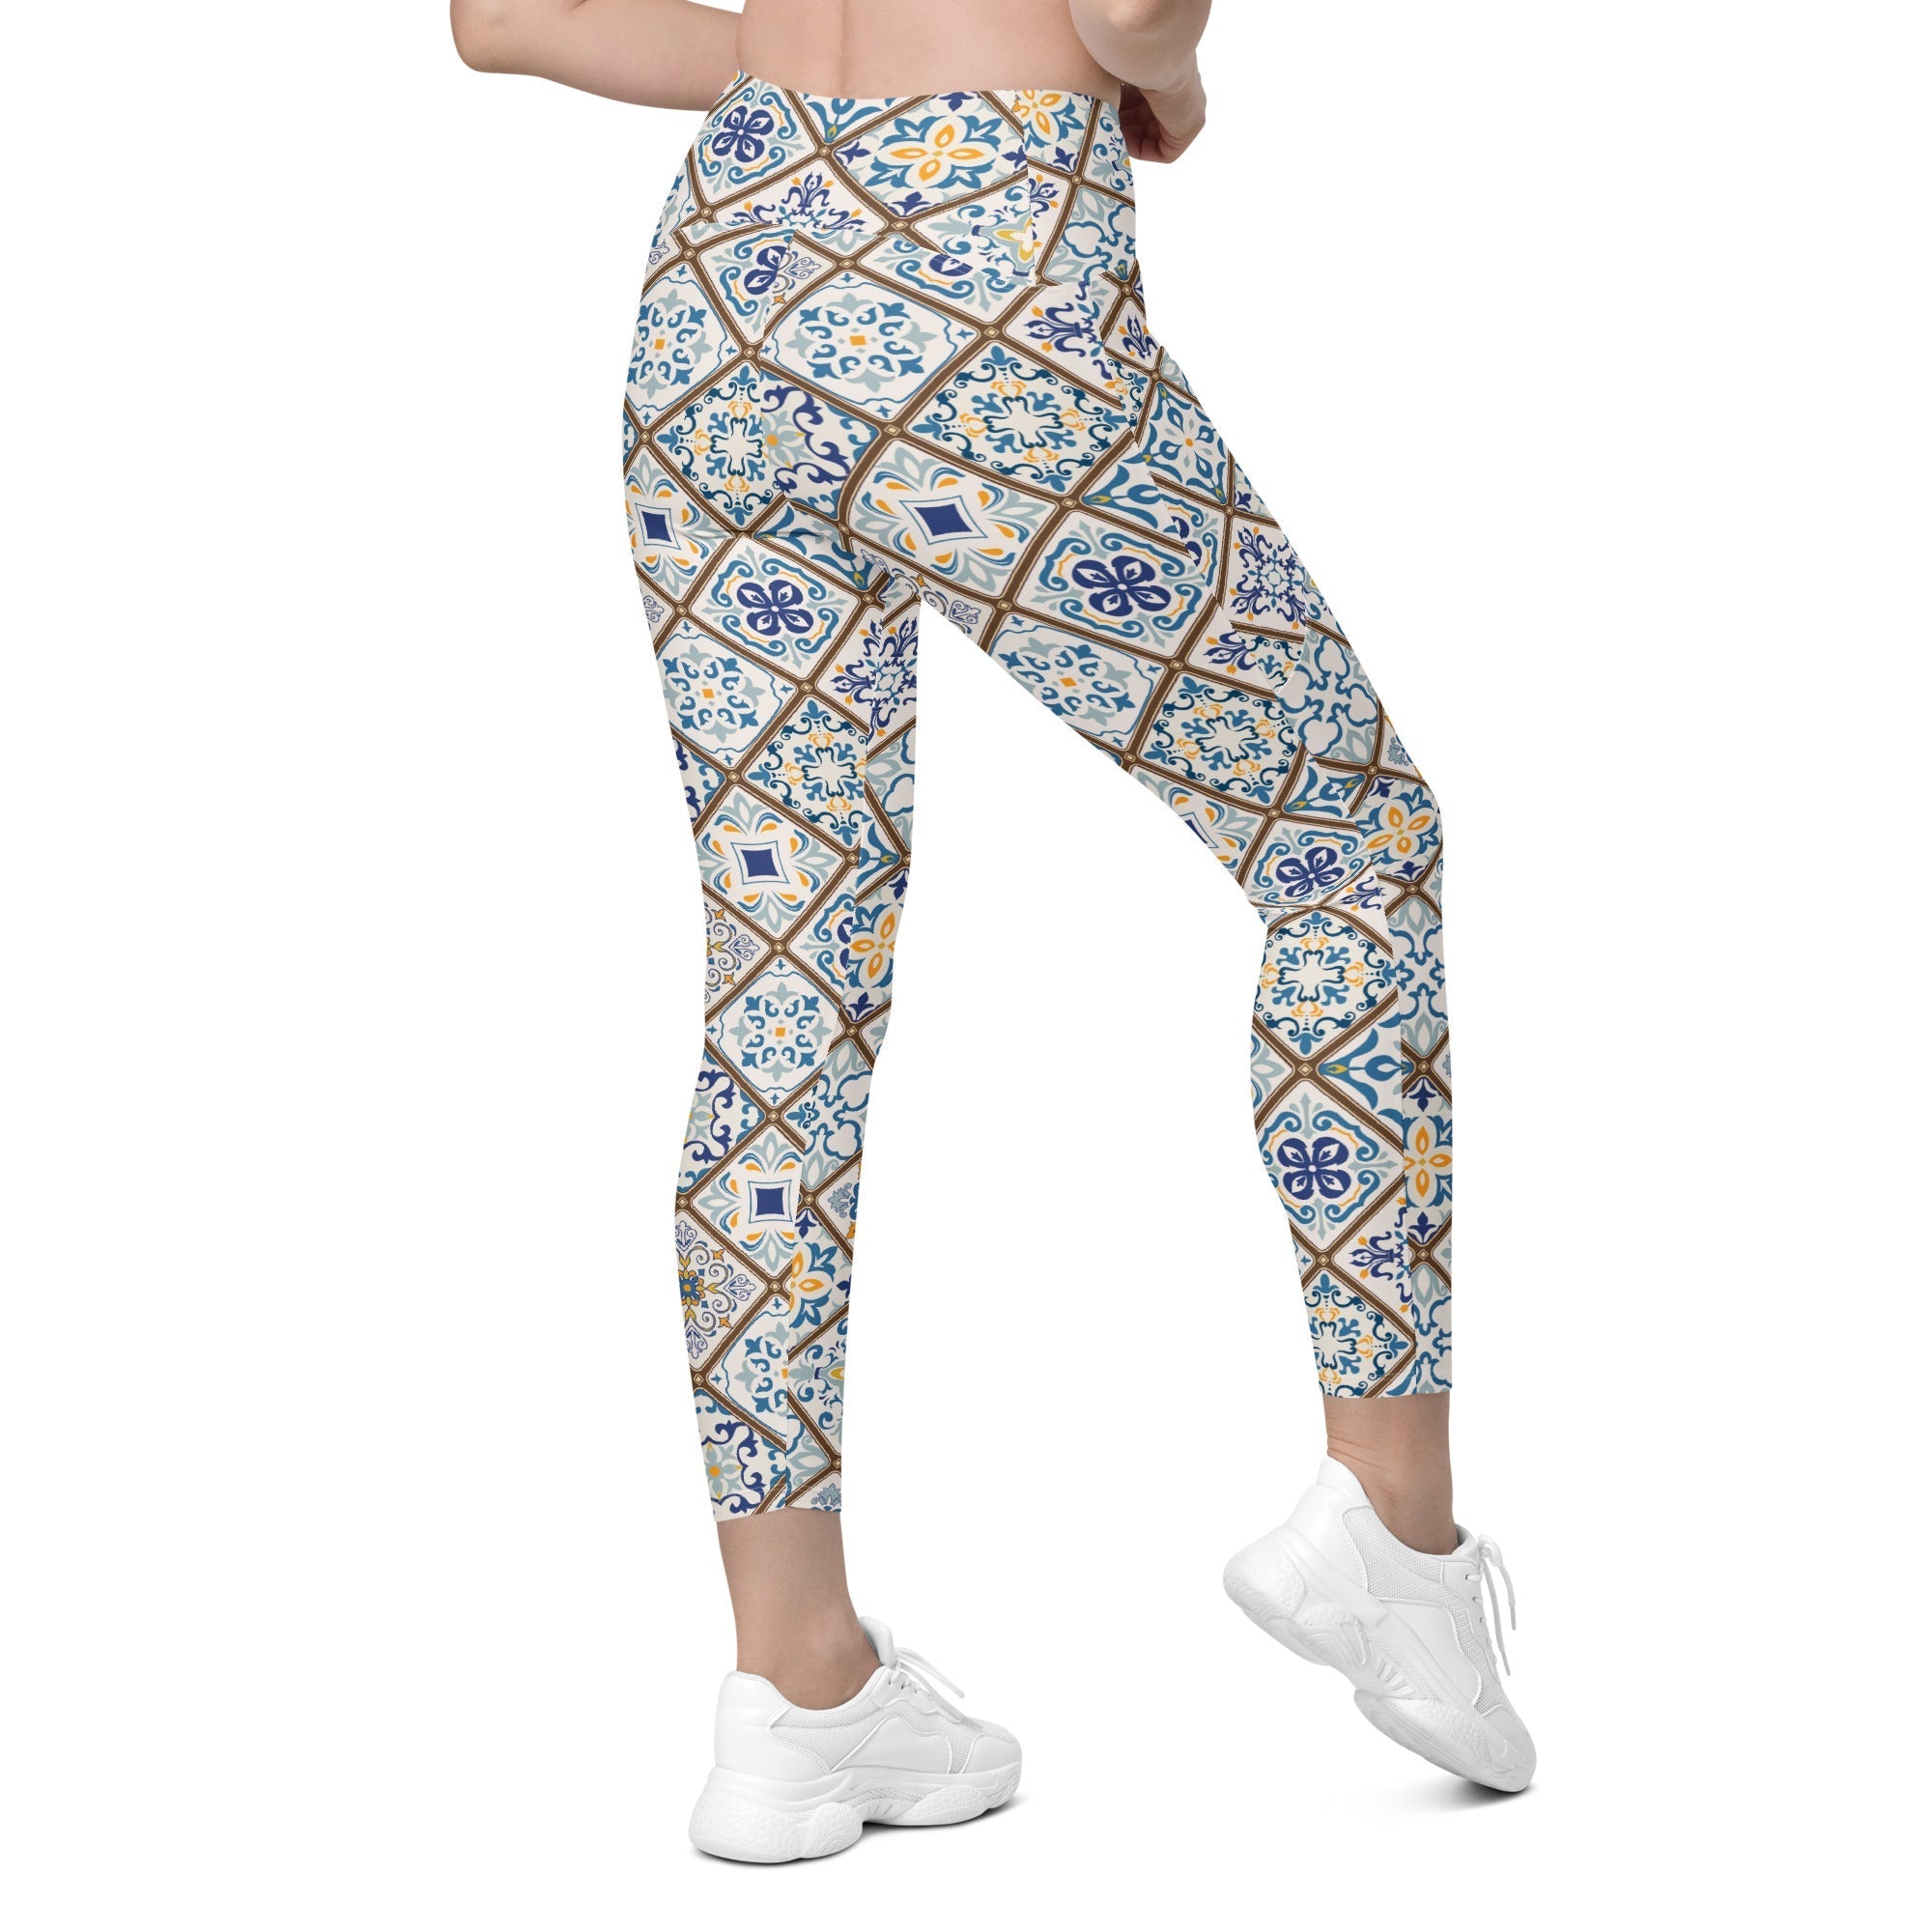 Floral Tile Print Crossover Leggings With Pockets